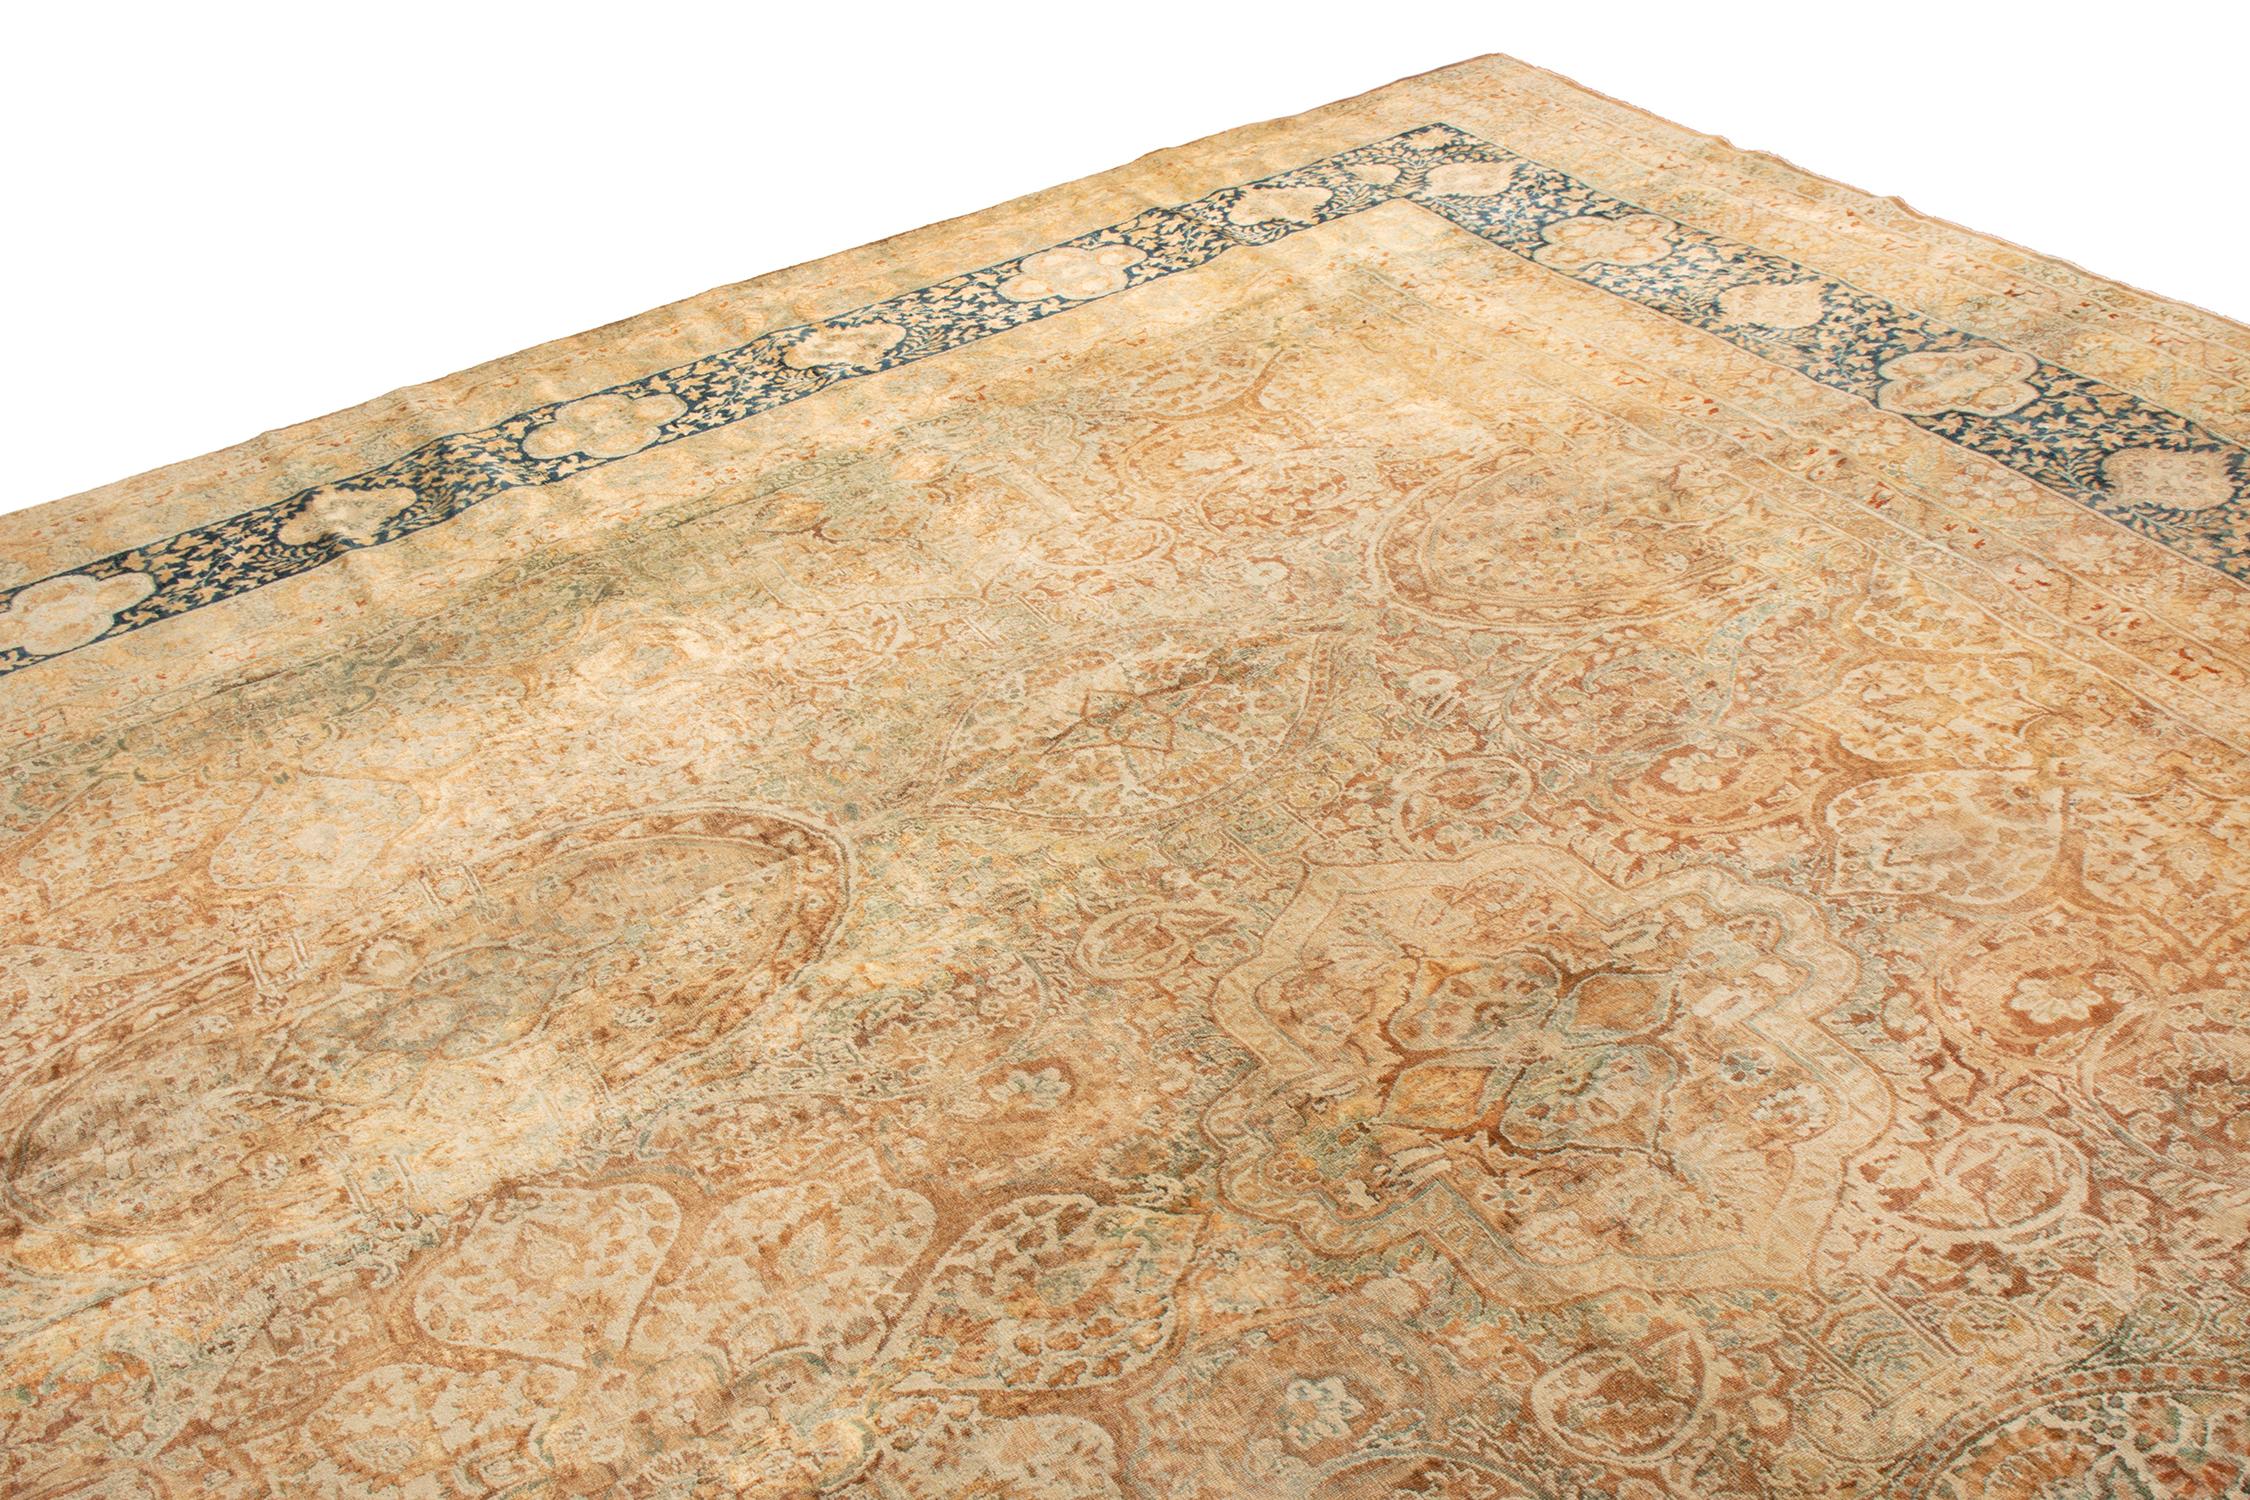 This antique traditional Kerman Lavar floral rug has diverse colors in well-aged wool pile. Originating circa 1910-1920, the natural dye is lightly distressed in frost blue, white, and rustic bronze, though the rustic accent only brings out the